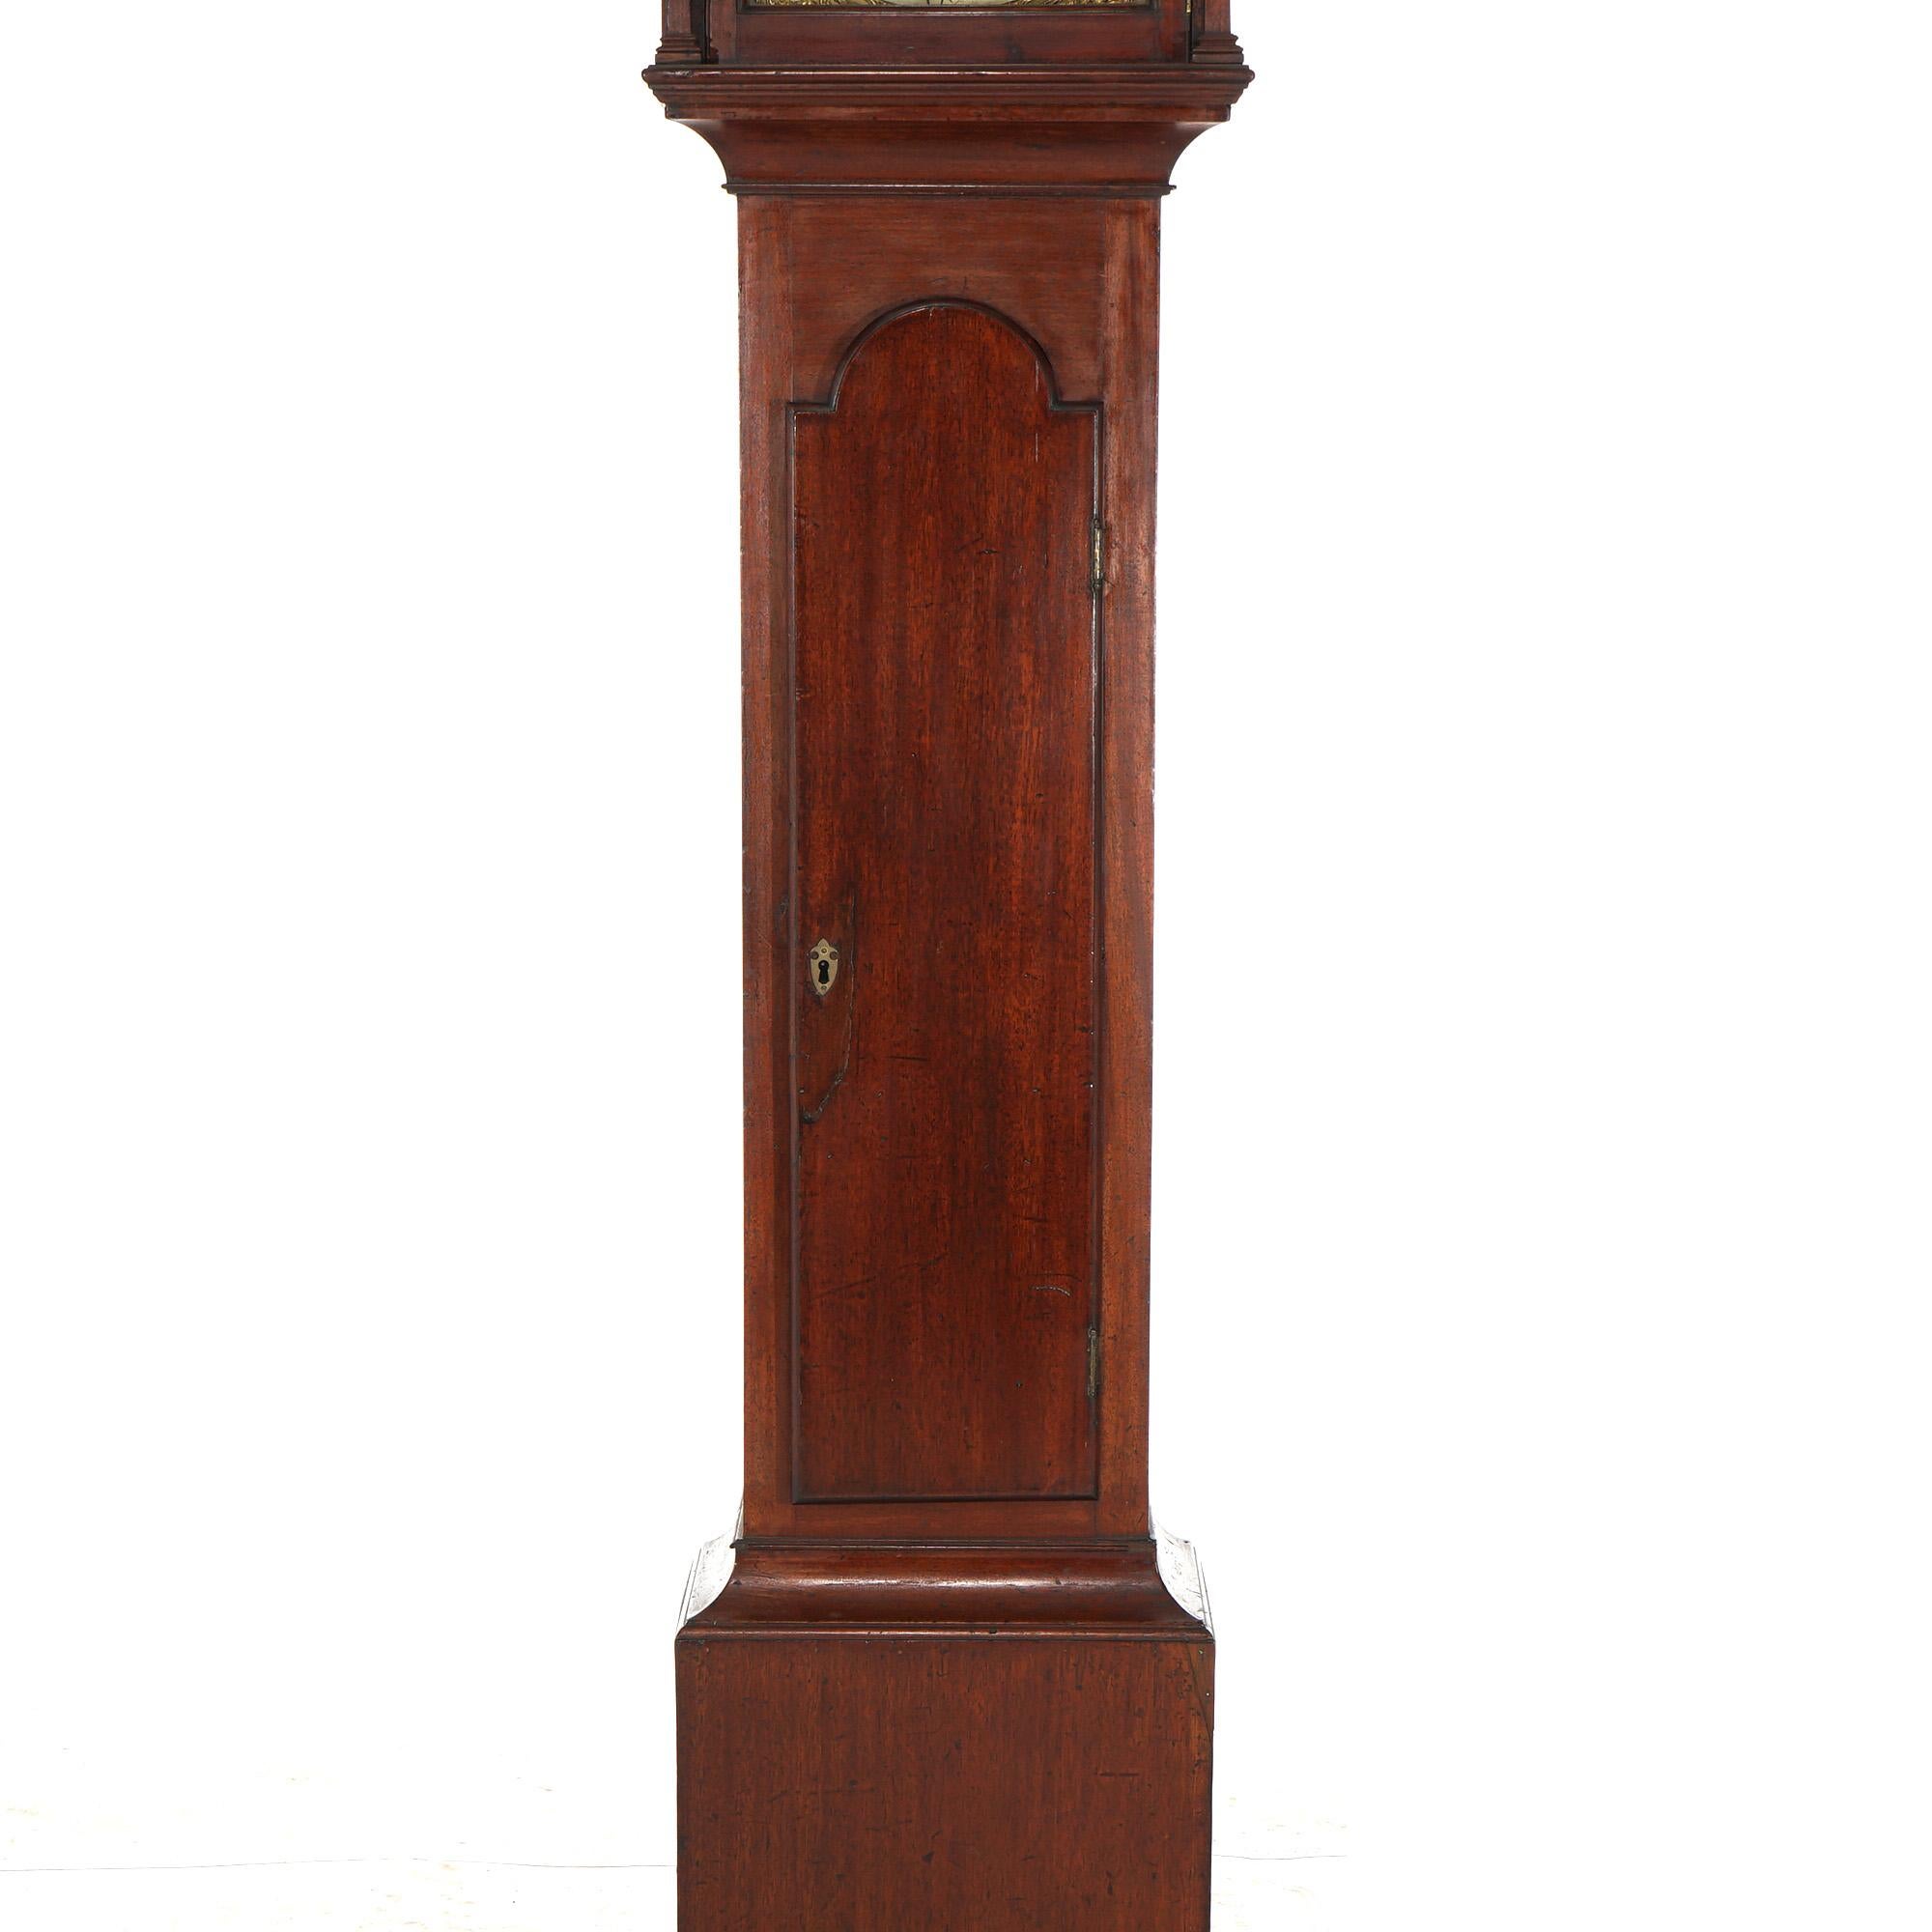 Antique Thomas Farrer Mahogany Grandfather Clock With Brass Finials 19thC In Good Condition For Sale In Big Flats, NY